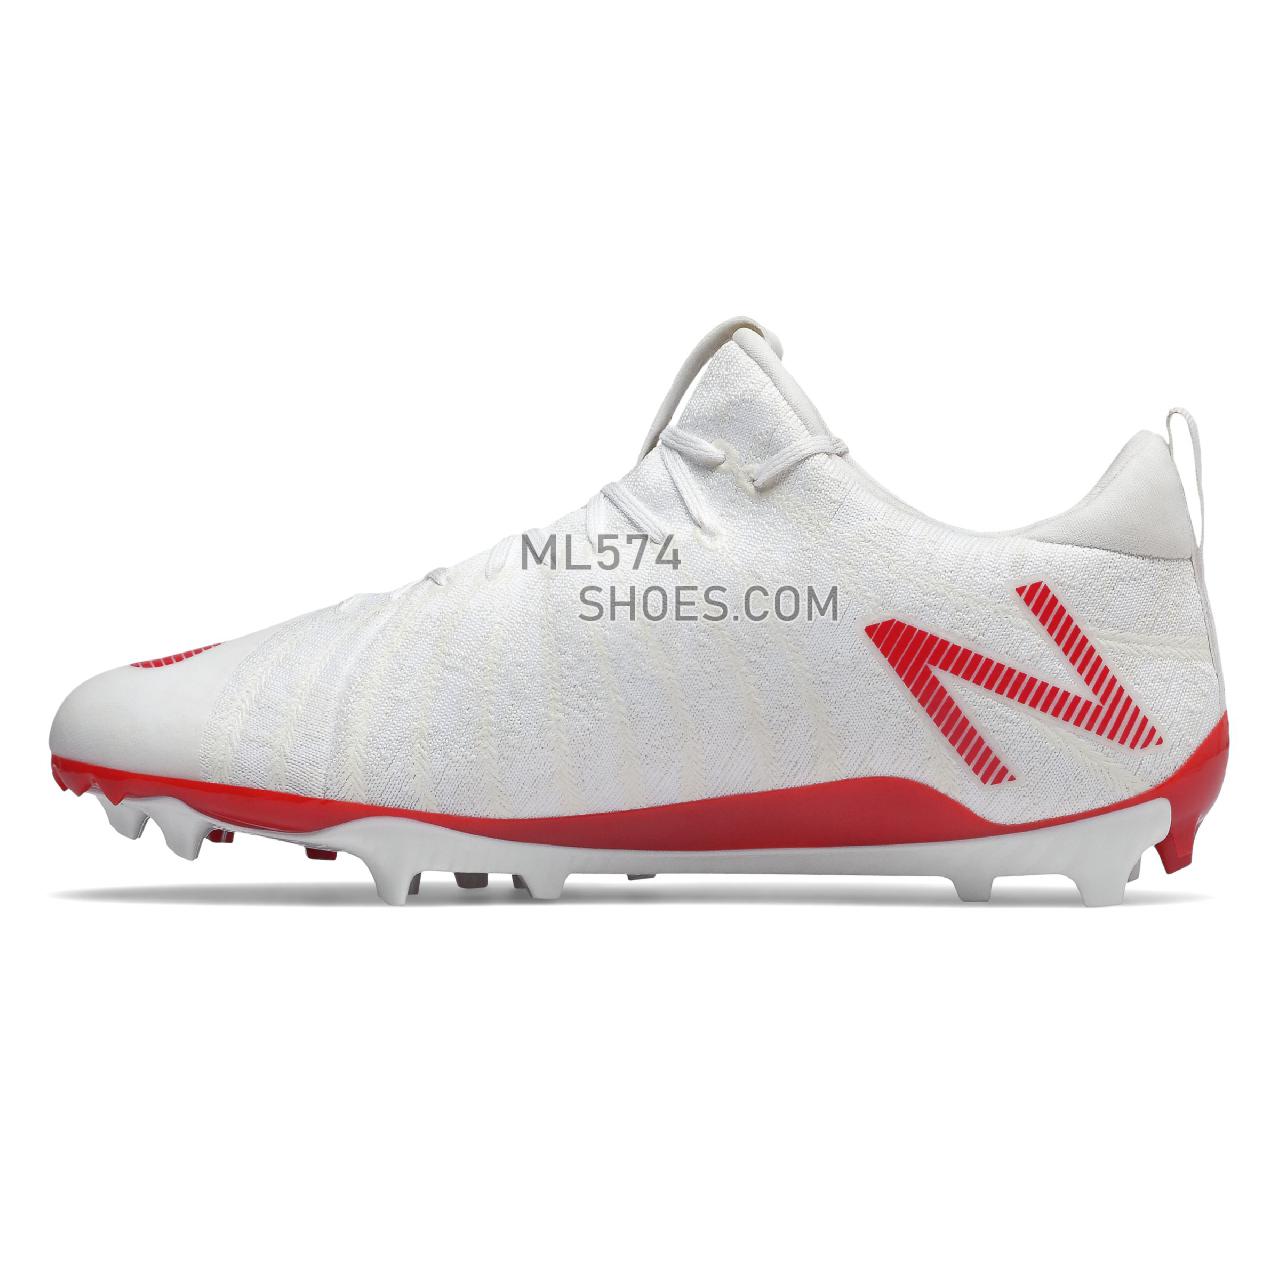 New Balance BurnX2 Low - Men's Turf And Lacrosse Cleats - White with Red - BURNXLR2